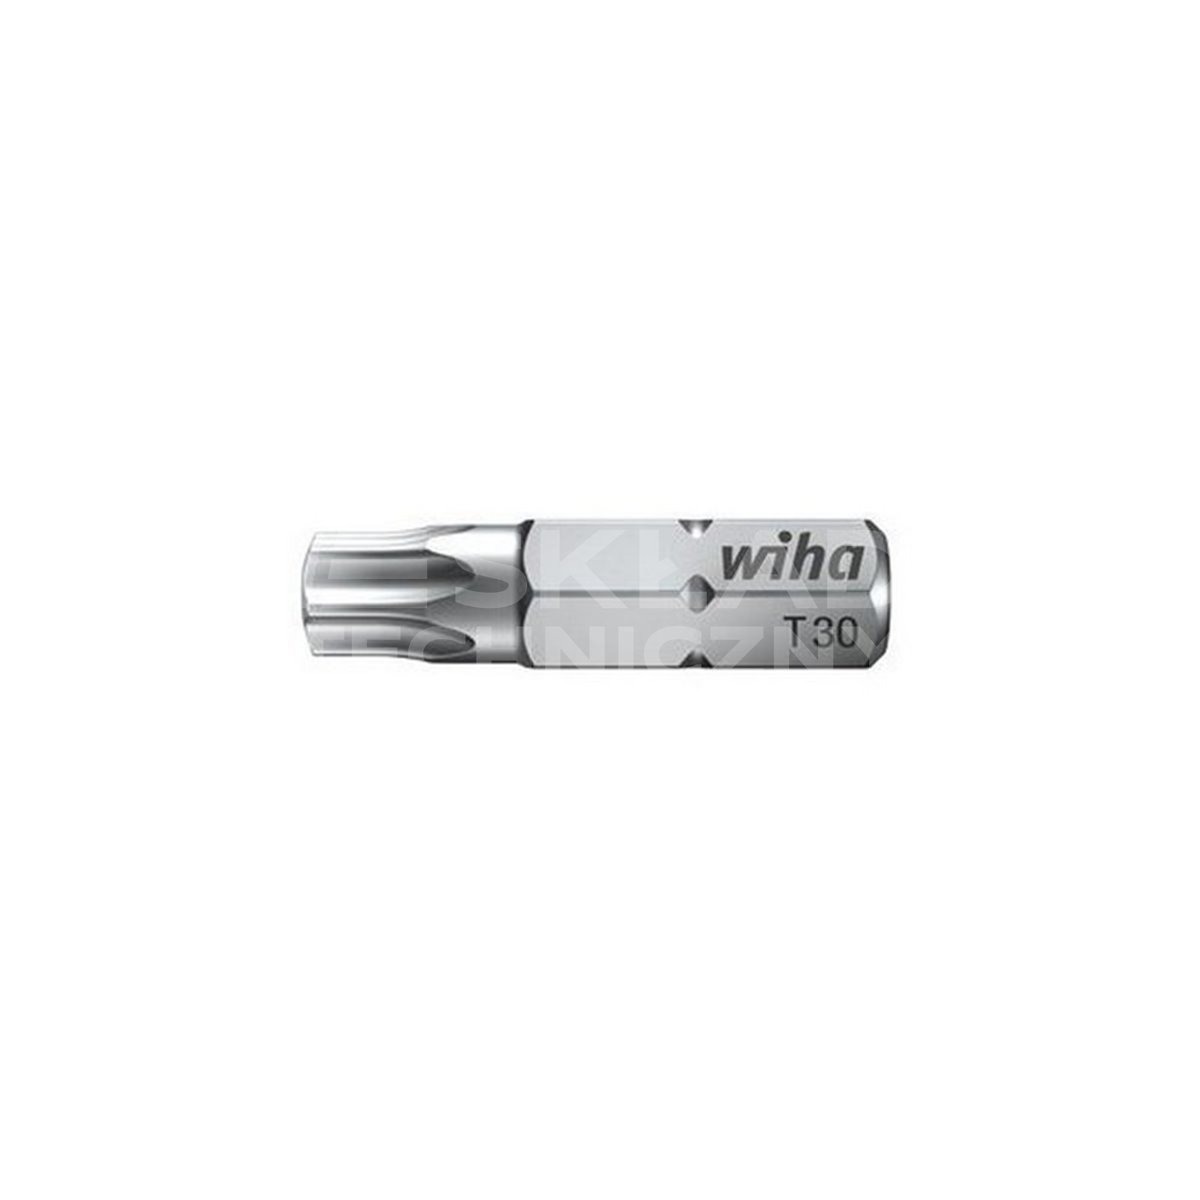 Standard Torx bit, C shape, 6.3 size, 7015Z model, T6x25mm size, made by Wiha and bearing the product code 01712.